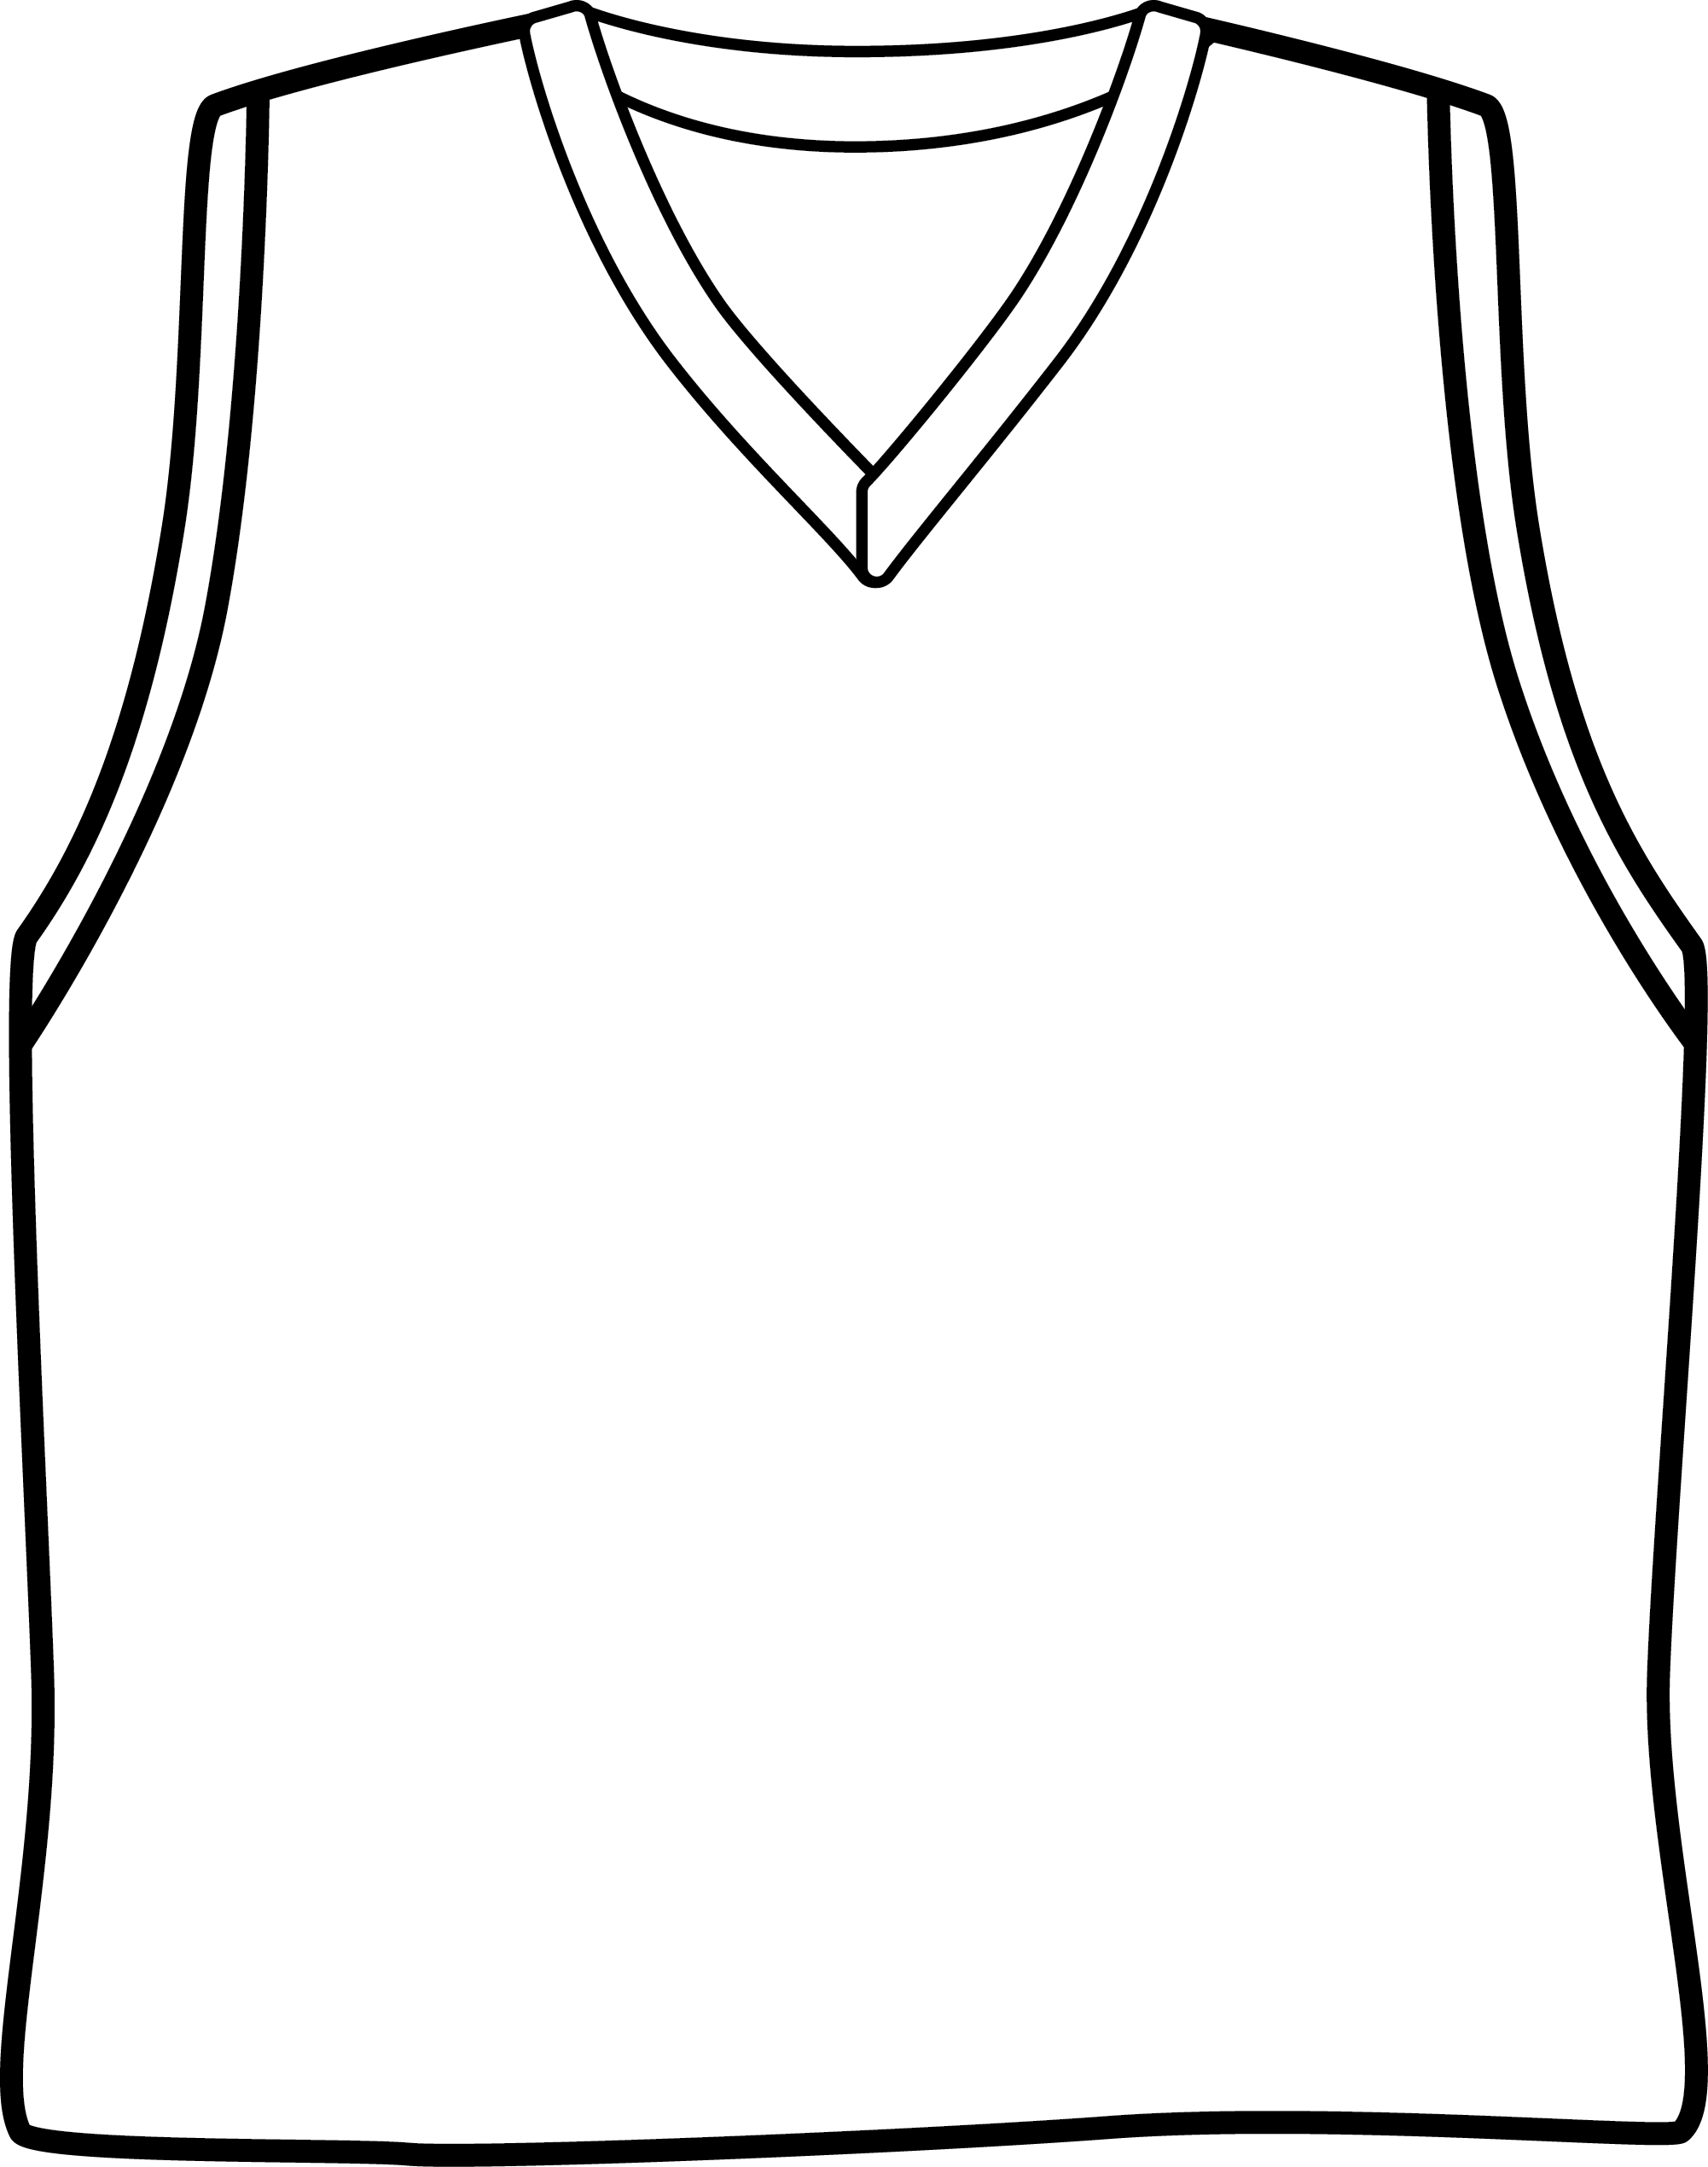 Basketball Jersey Template | Free Download Clip Art | Free Clip ...